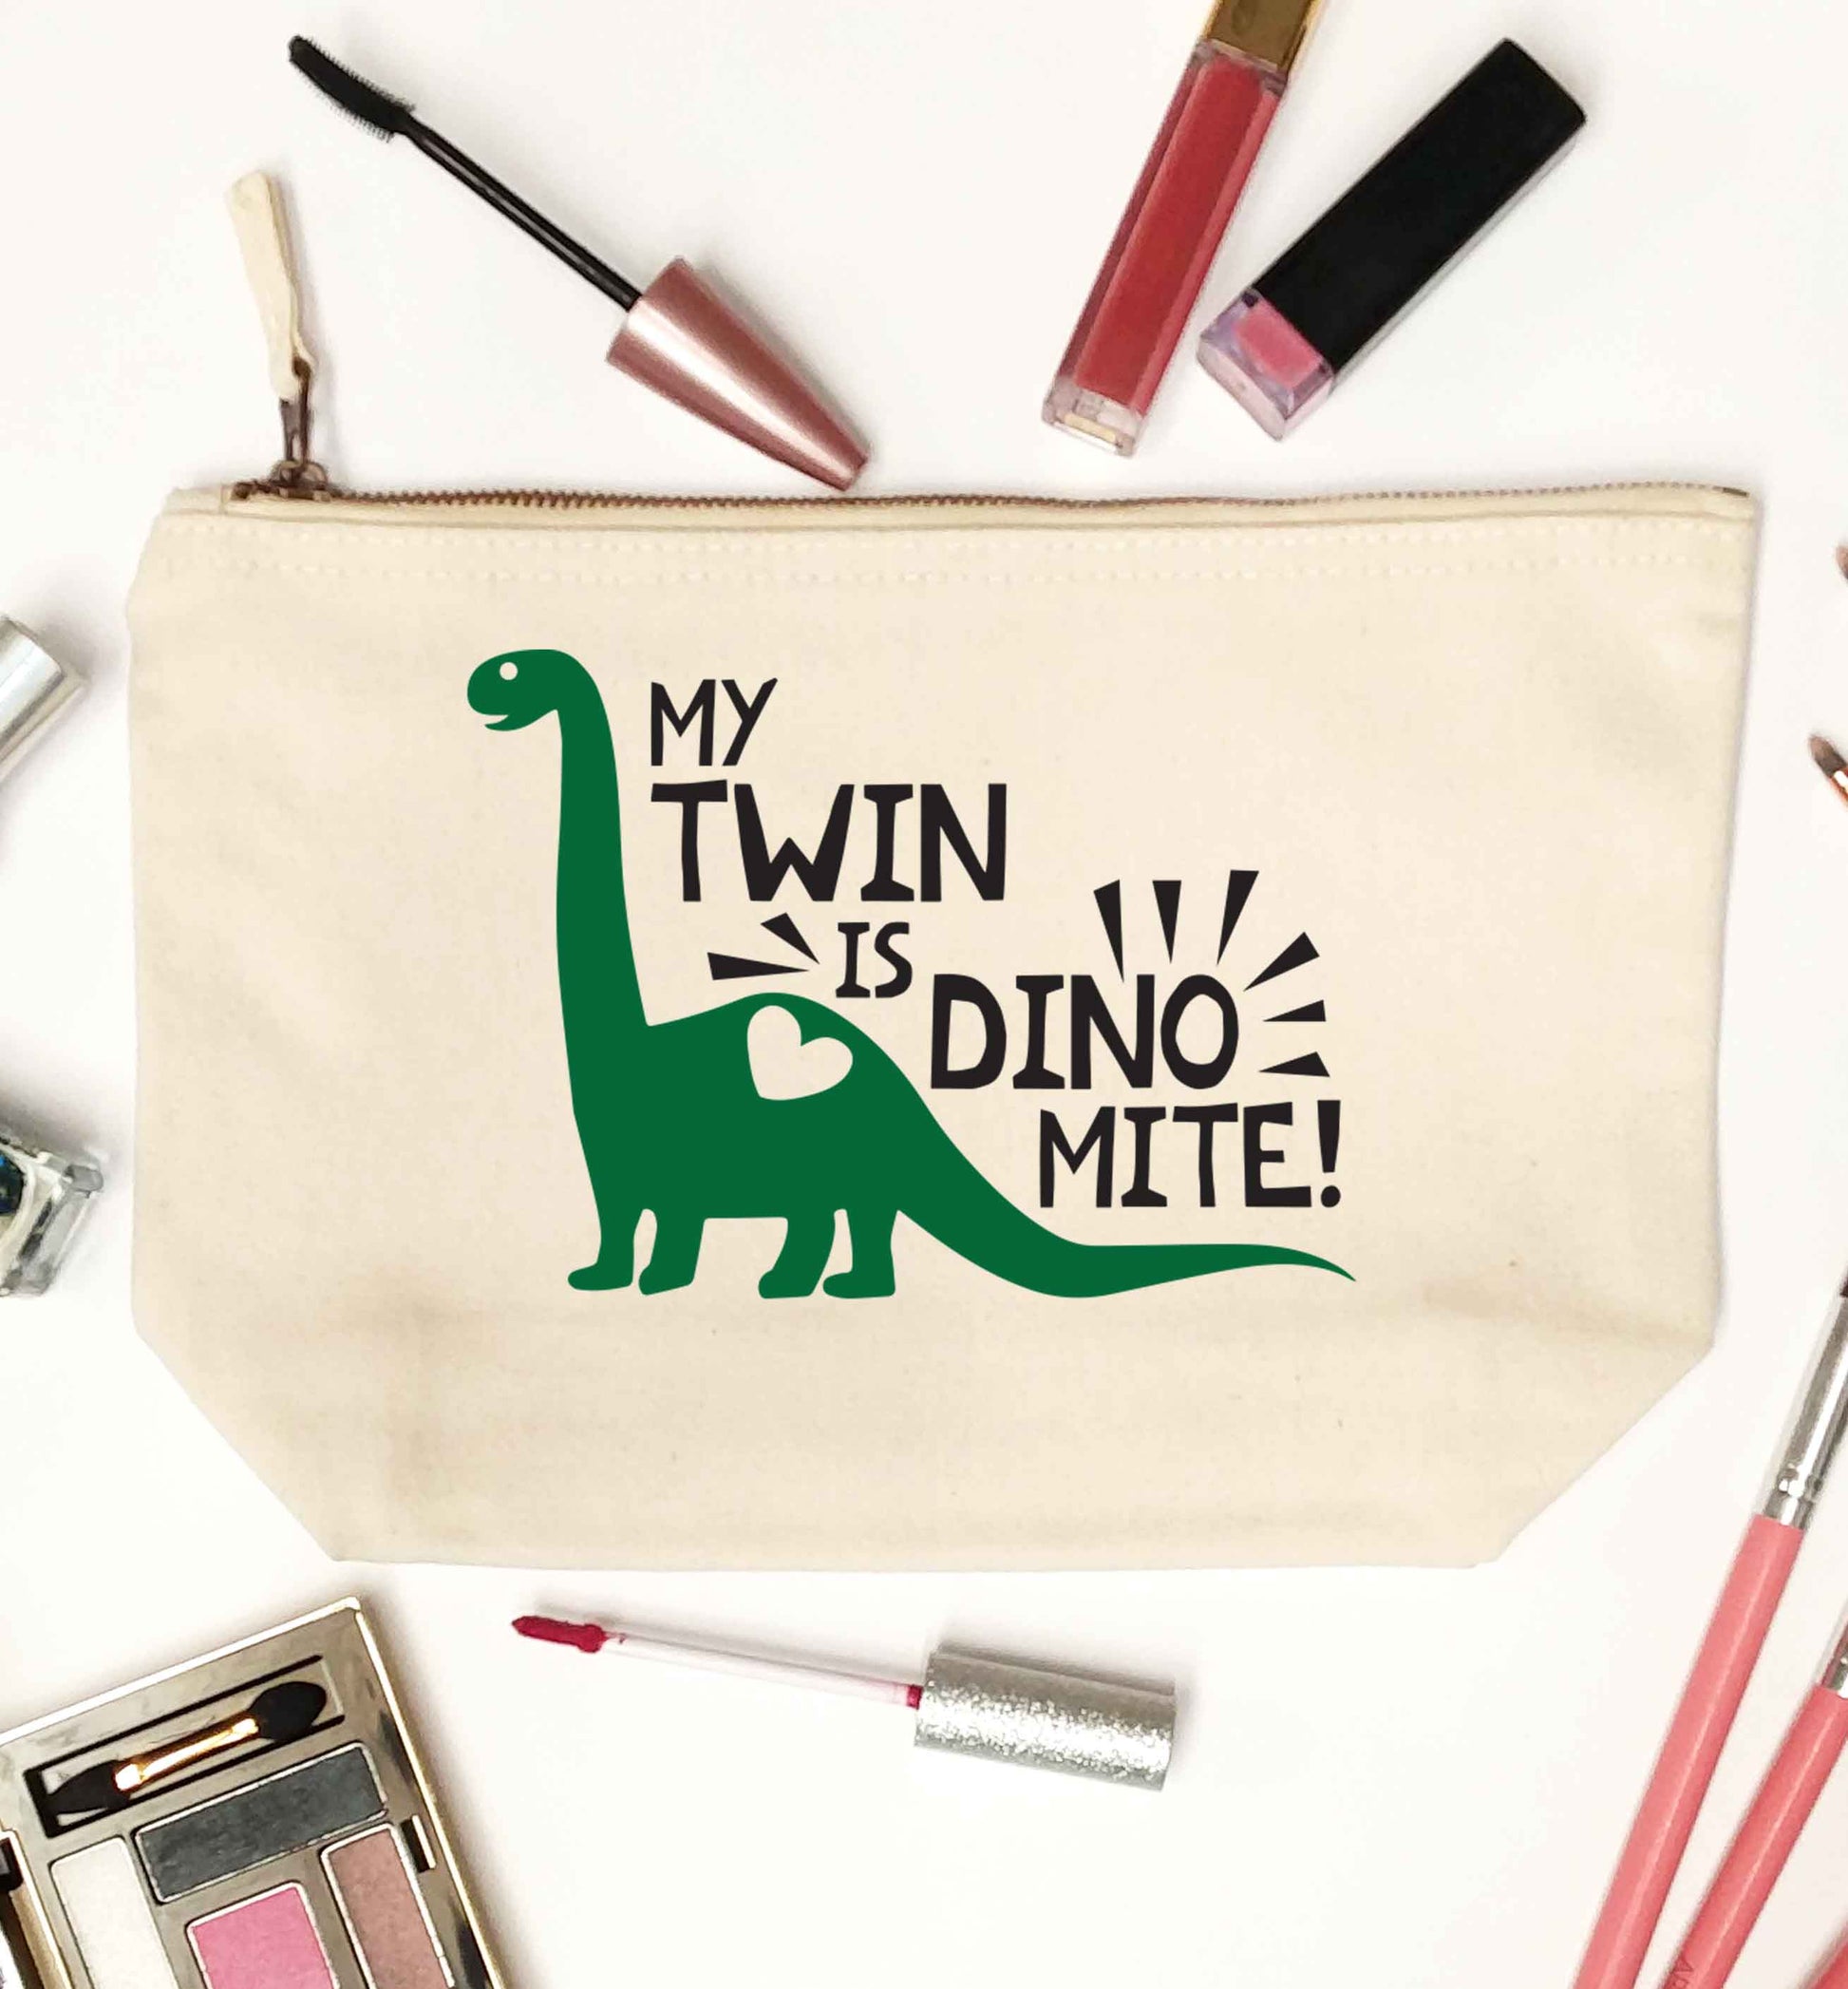 My twin is dinomite! natural makeup bag